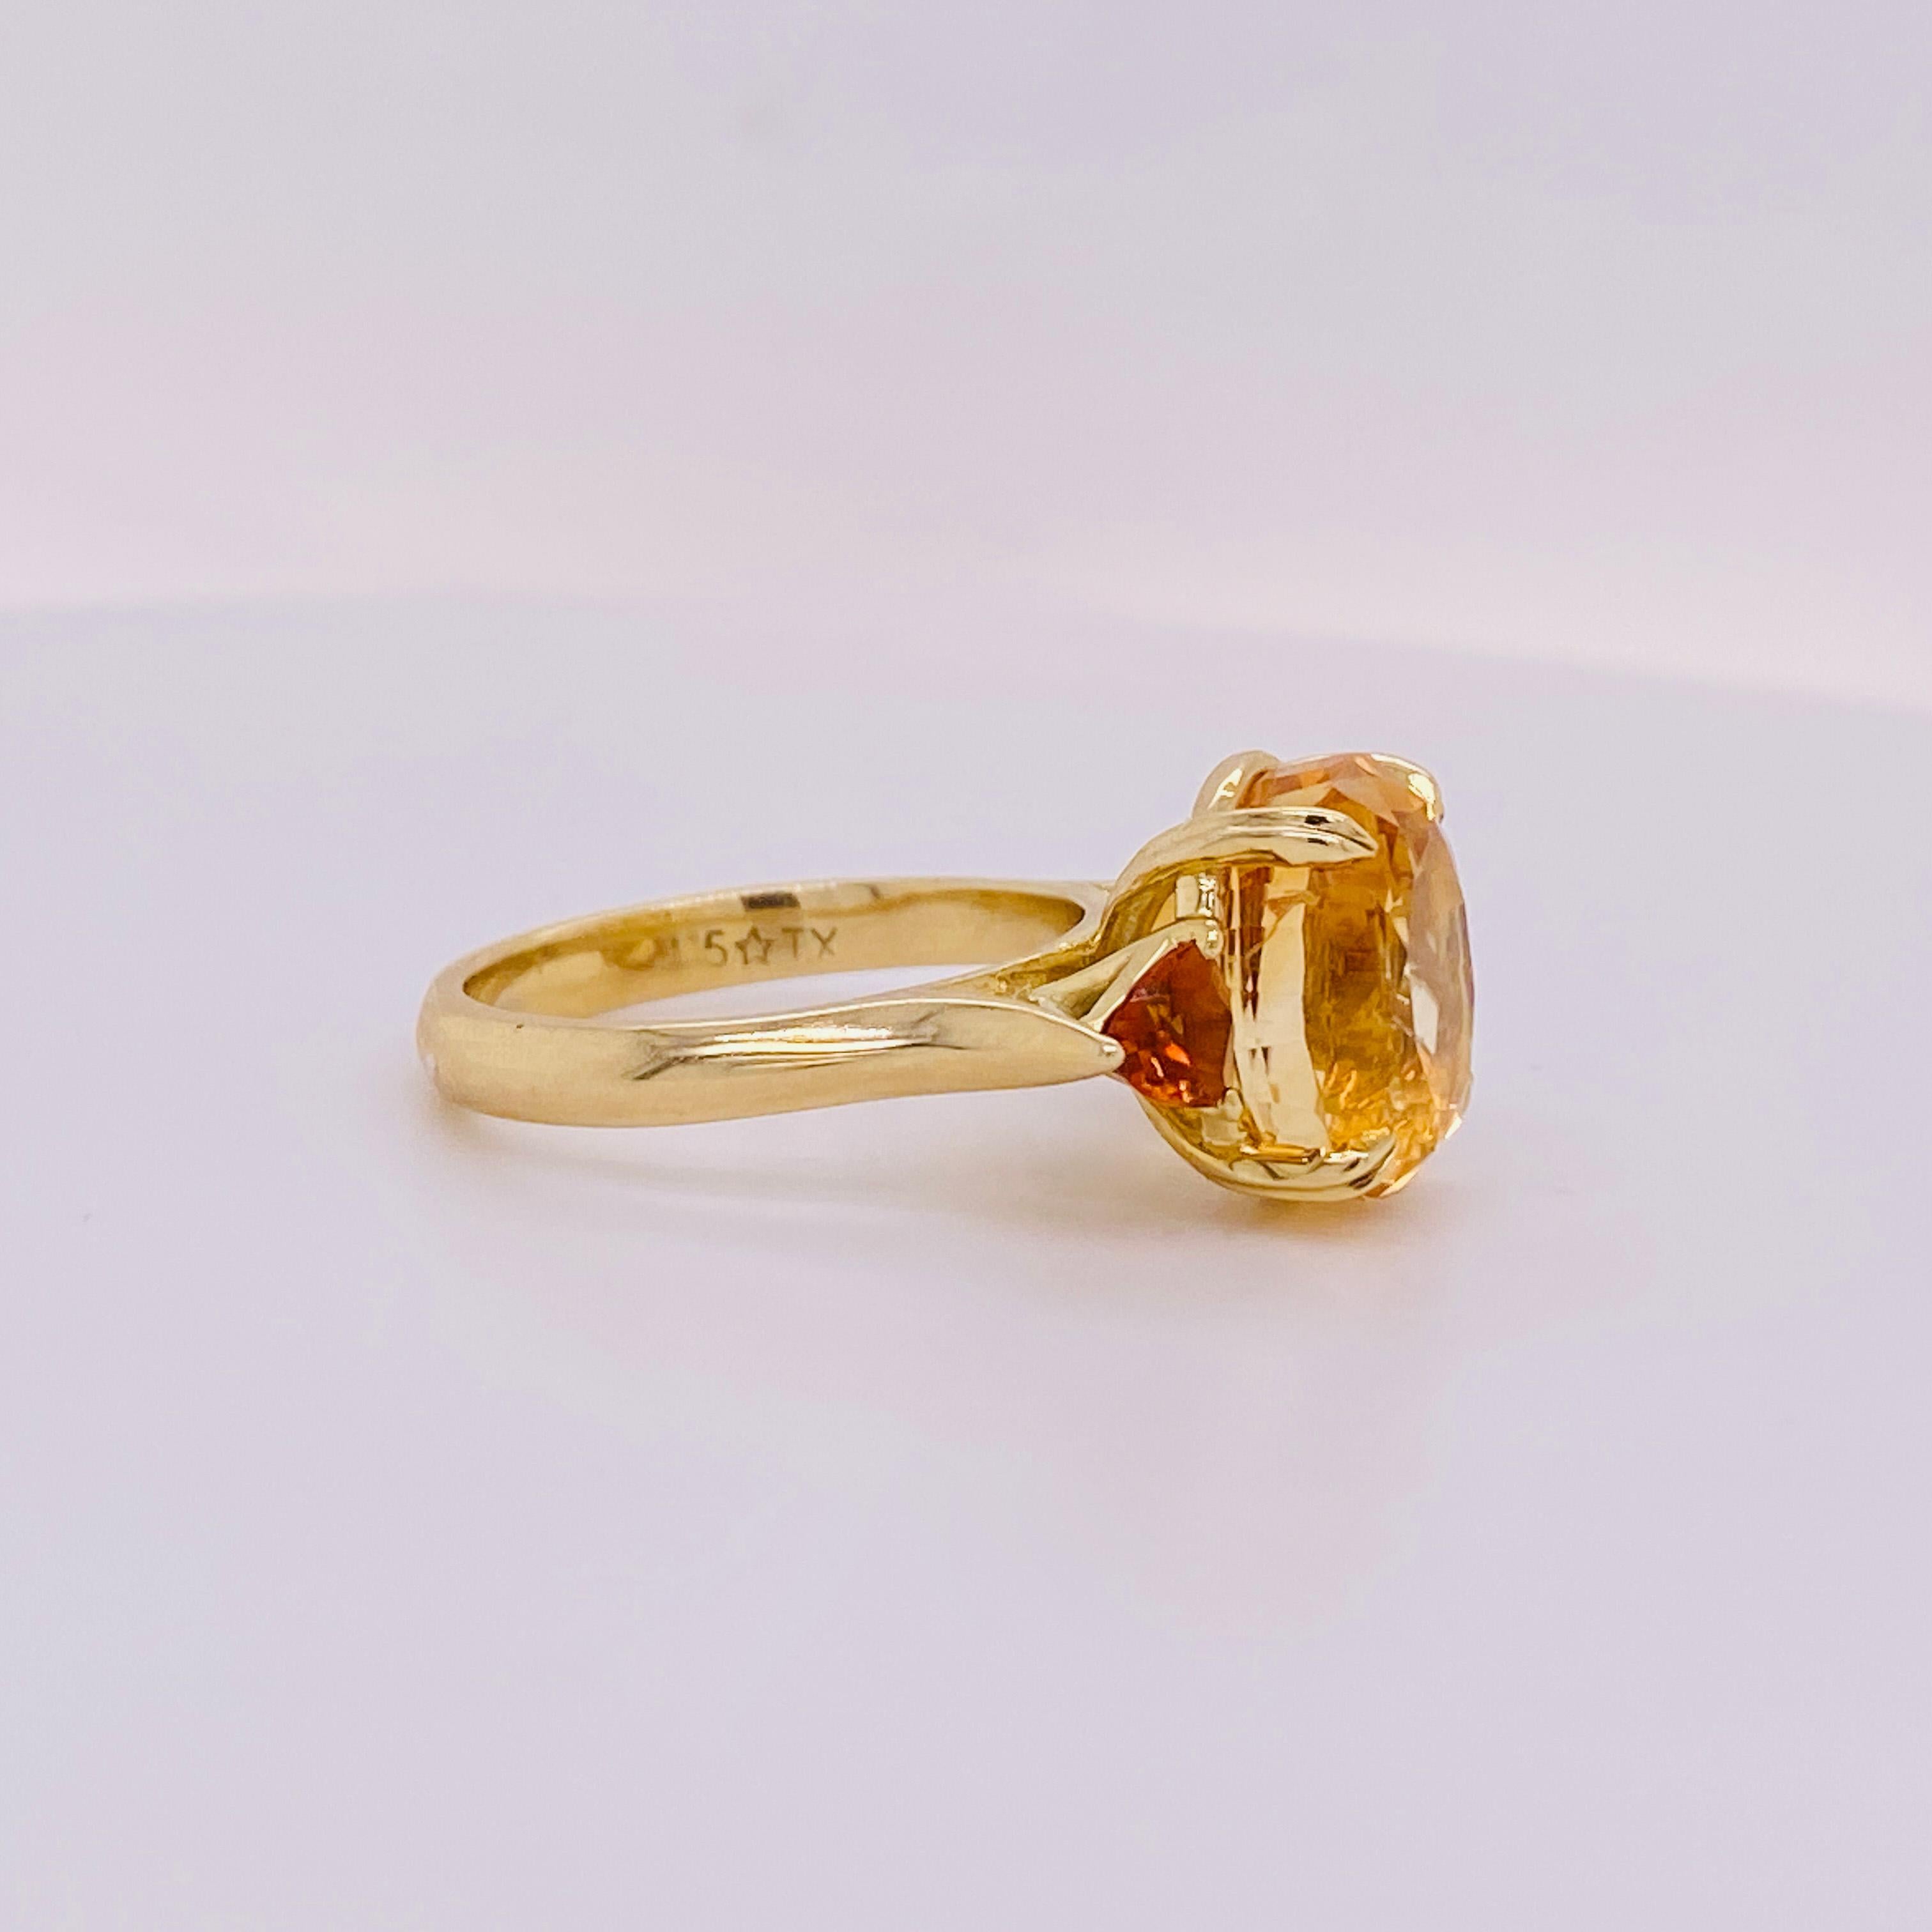 Contemporary 7.12 Carats Citrines, Honey & Mandarin Oranges, Three-Stone Ring in 14K Gold LV For Sale